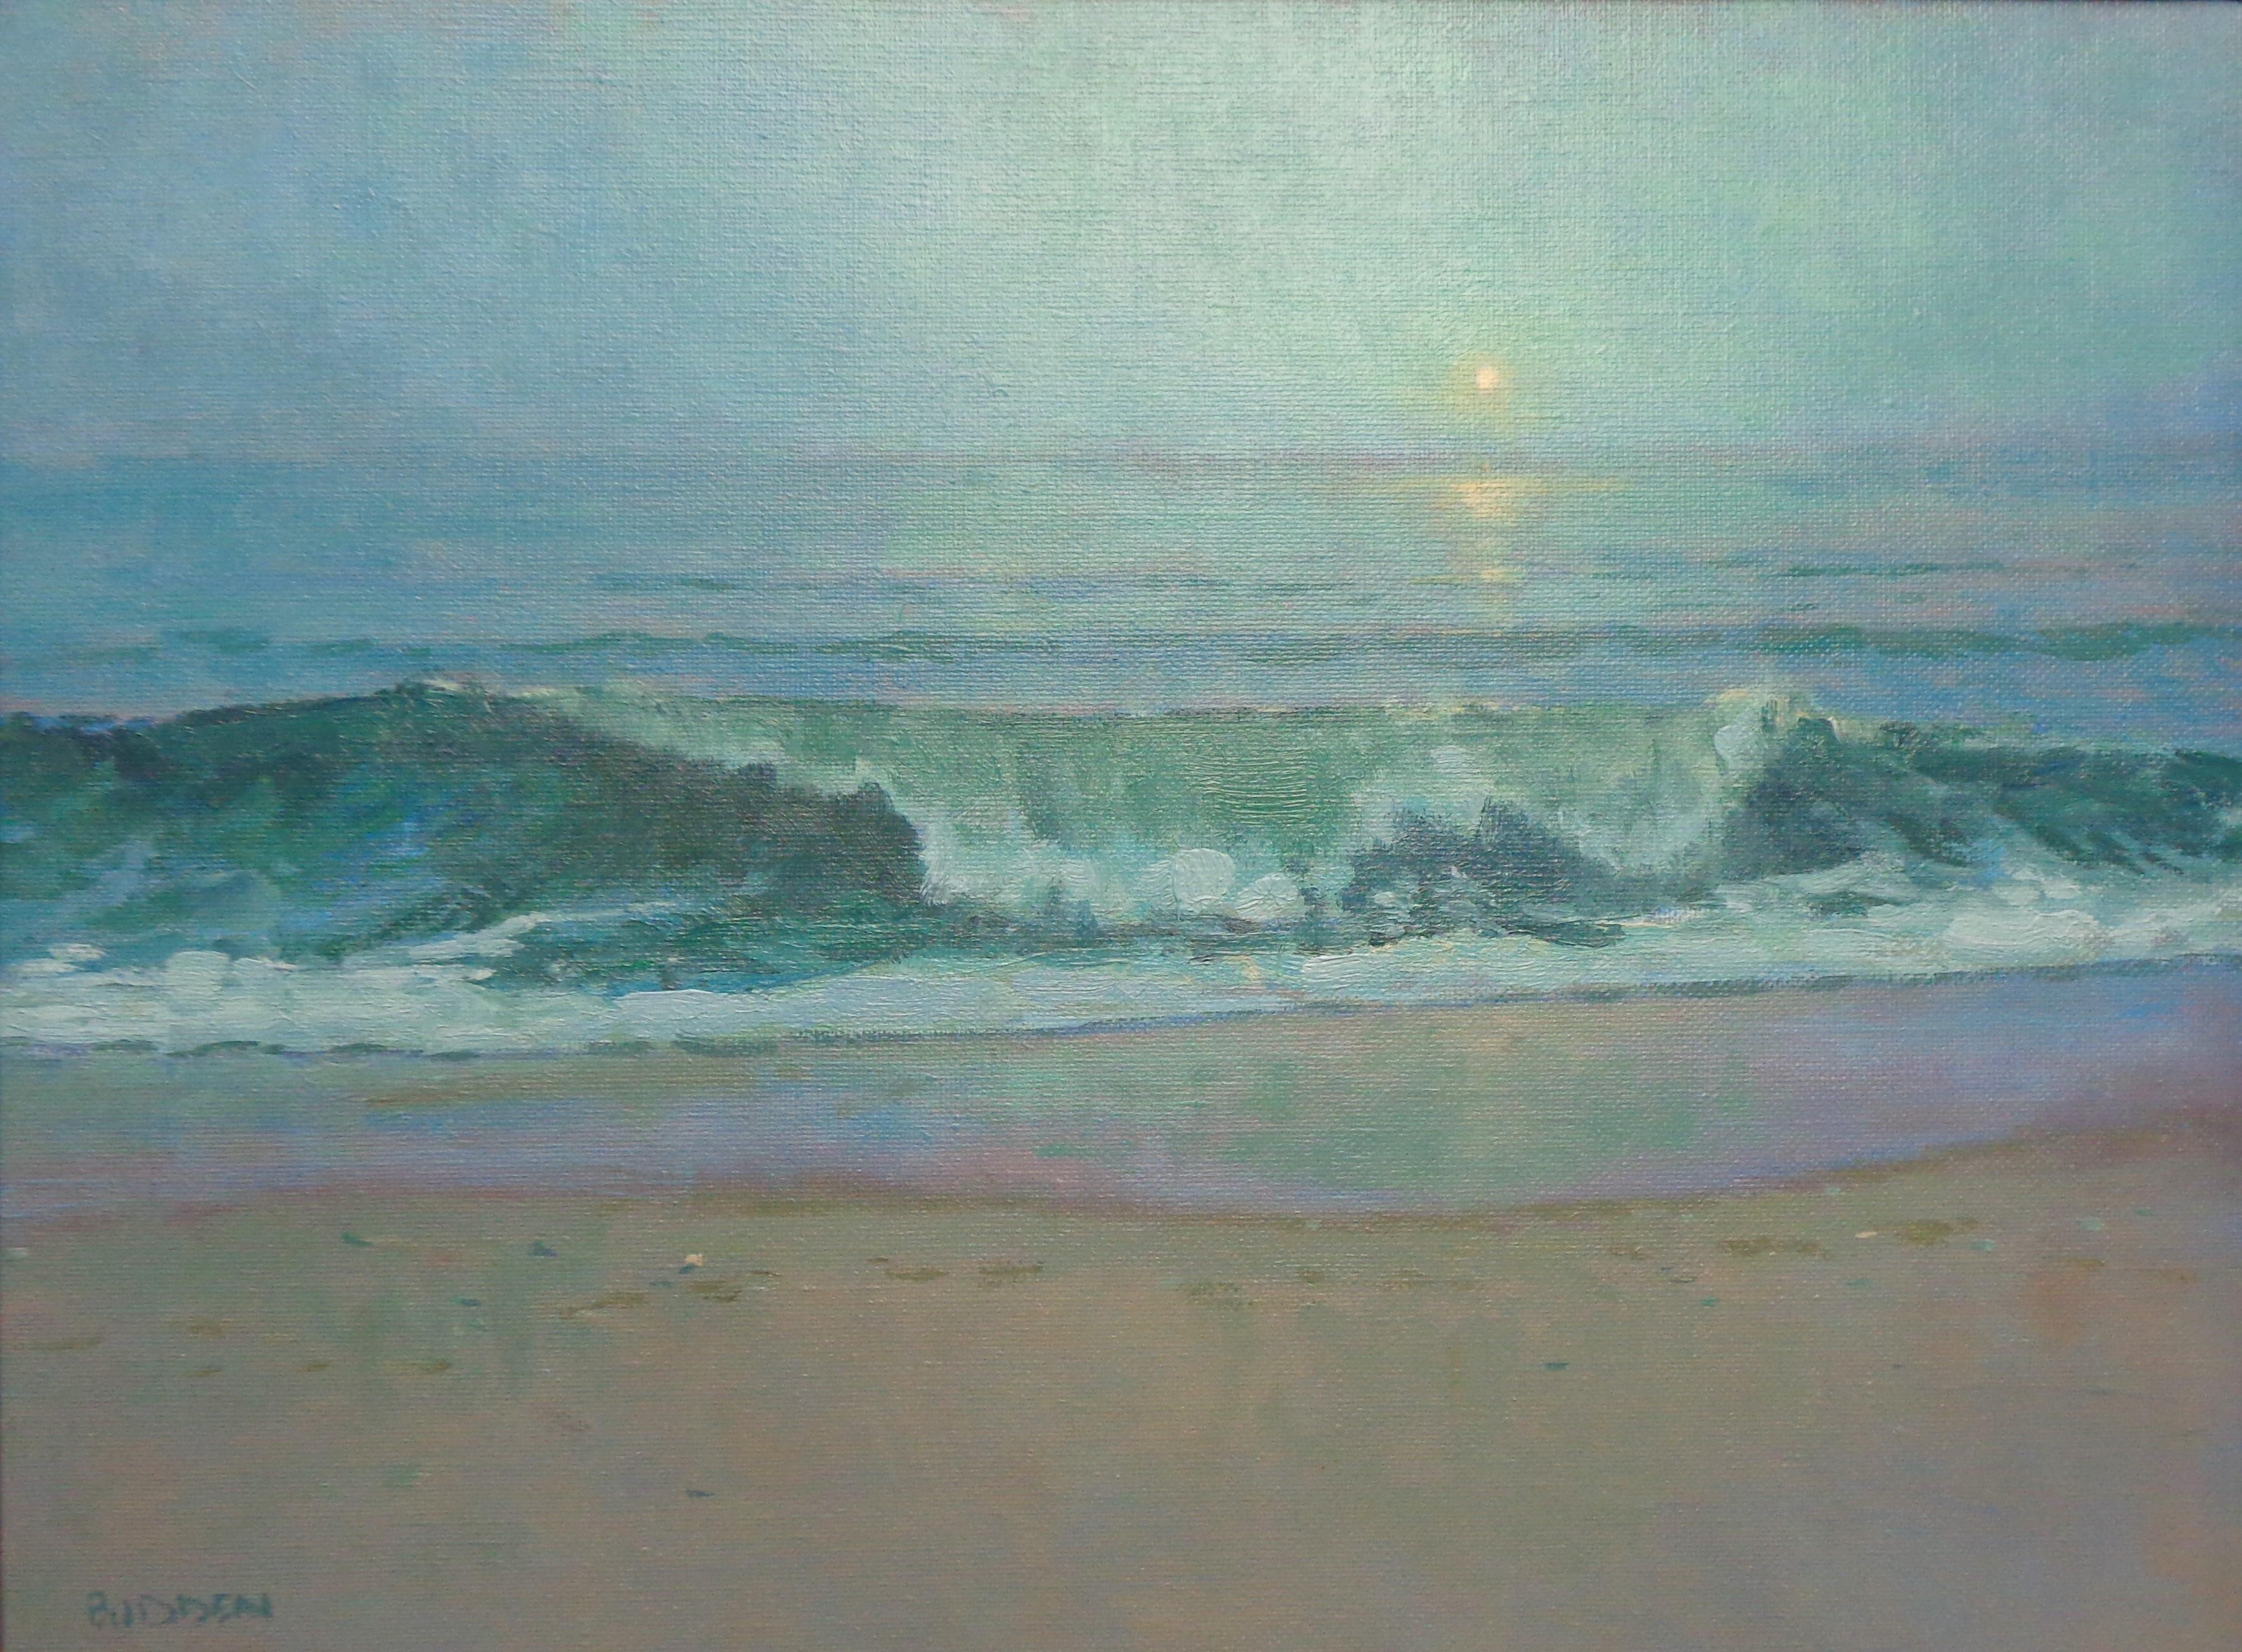  Impressionistic Moonlight Seascape Oil Painting Michael Budden Beach  For Sale 1